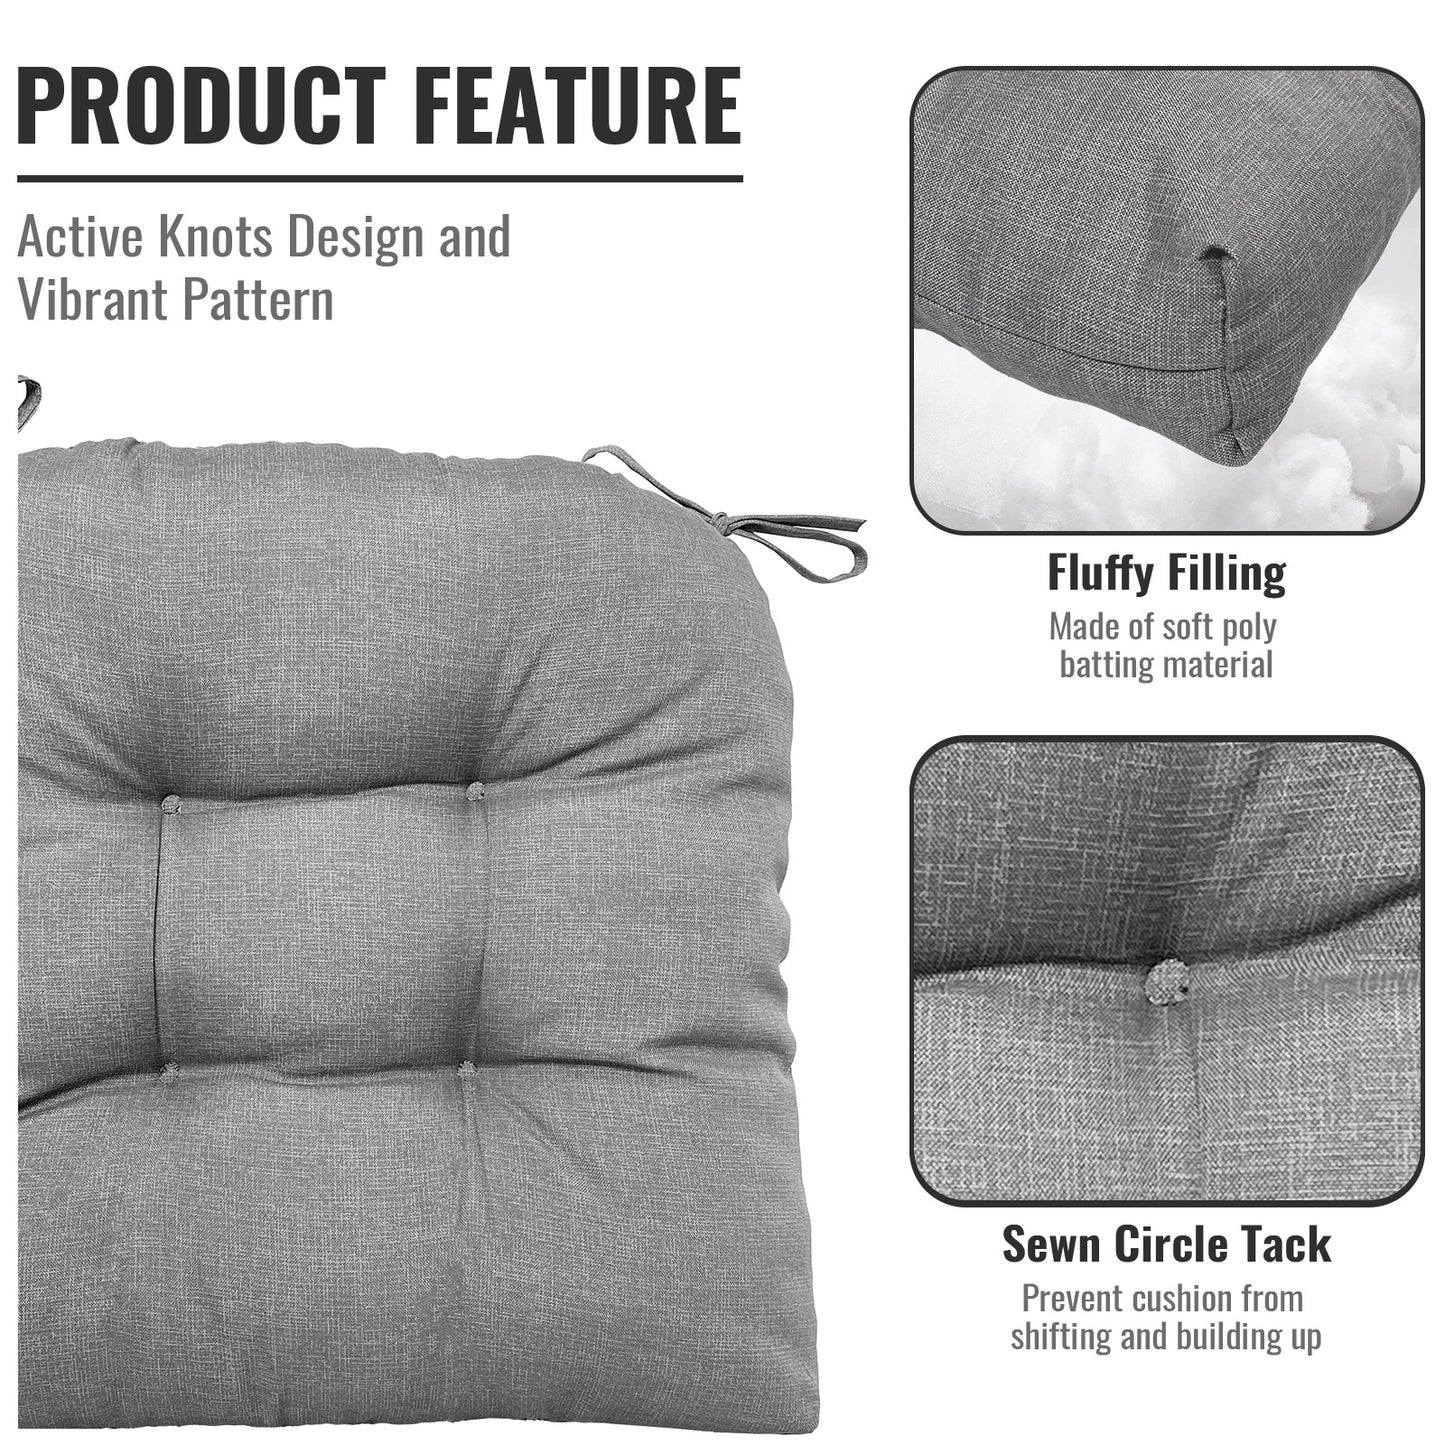 Melody Elephant Patio Wicker Chair Cushions, All Weather Outdoor Tufted Chair Pads Pack of 2, 19 x 19 x 5 Inch U-Shaped Seat Cushions of Garden Furniture Decoration, Textured Gray